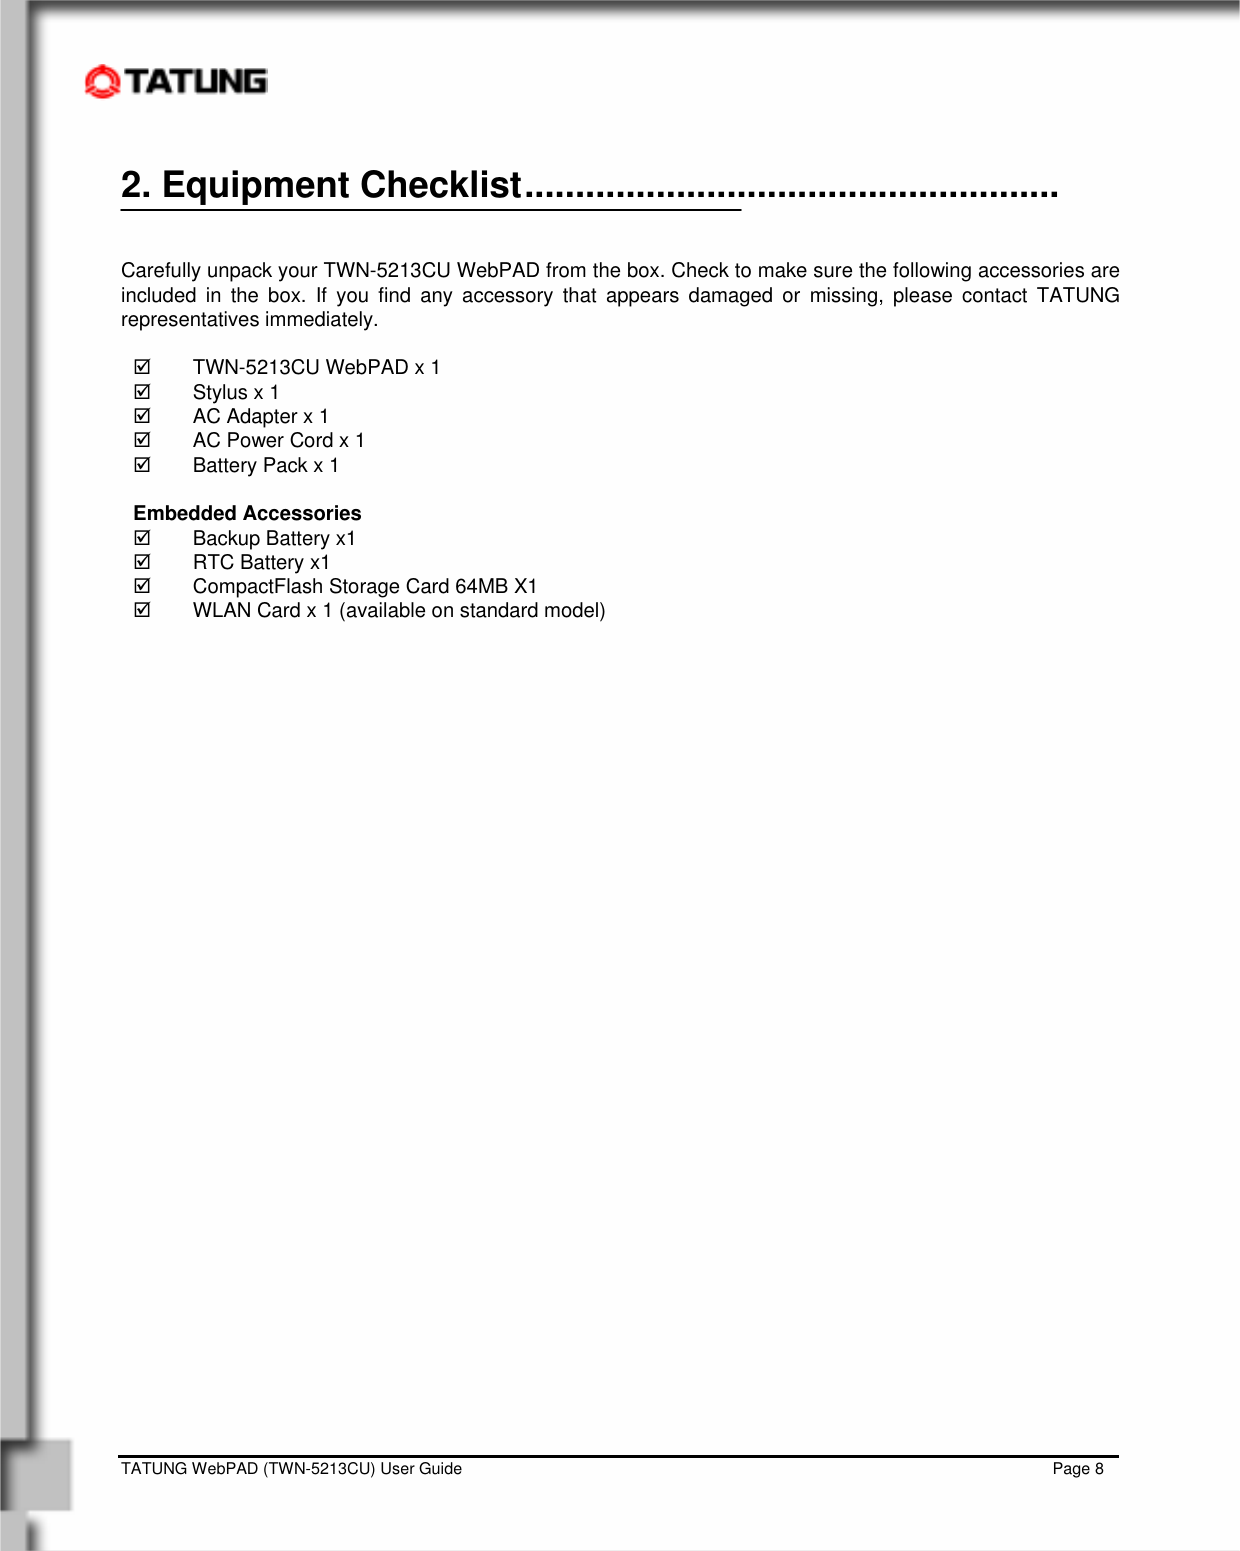    TATUNG WebPAD (TWN-5213CU) User Guide                                                                                                                                   Page 8 2. Equipment Checklist.....................................................                                                                            Carefully unpack your TWN-5213CU WebPAD from the box. Check to make sure the following accessories are included in the box. If you find any accessory that appears damaged or missing, please contact TATUNG representatives immediately.  ;  TWN-5213CU WebPAD x 1 ;  Stylus x 1 ;  AC Adapter x 1 ;  AC Power Cord x 1 ;  Battery Pack x 1  Embedded Accessories ;  Backup Battery x1  ;  RTC Battery x1  ;  CompactFlash Storage Card 64MB X1  ;  WLAN Card x 1 (available on standard model)           